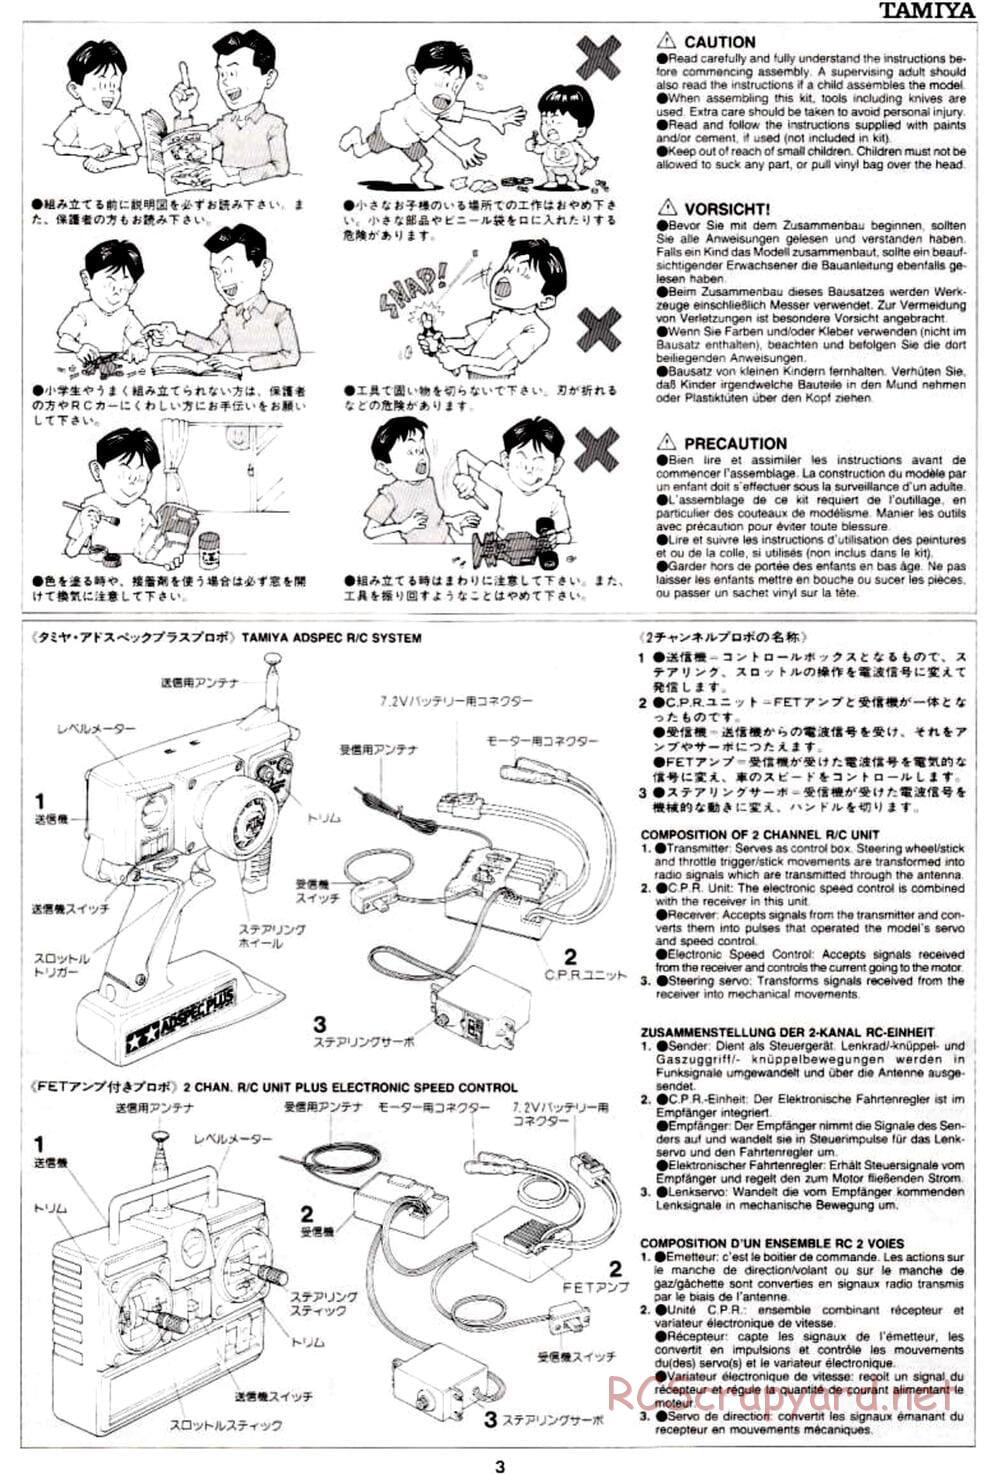 Tamiya - TA-03R TRF Special Edition Chassis - Manual - Page 3